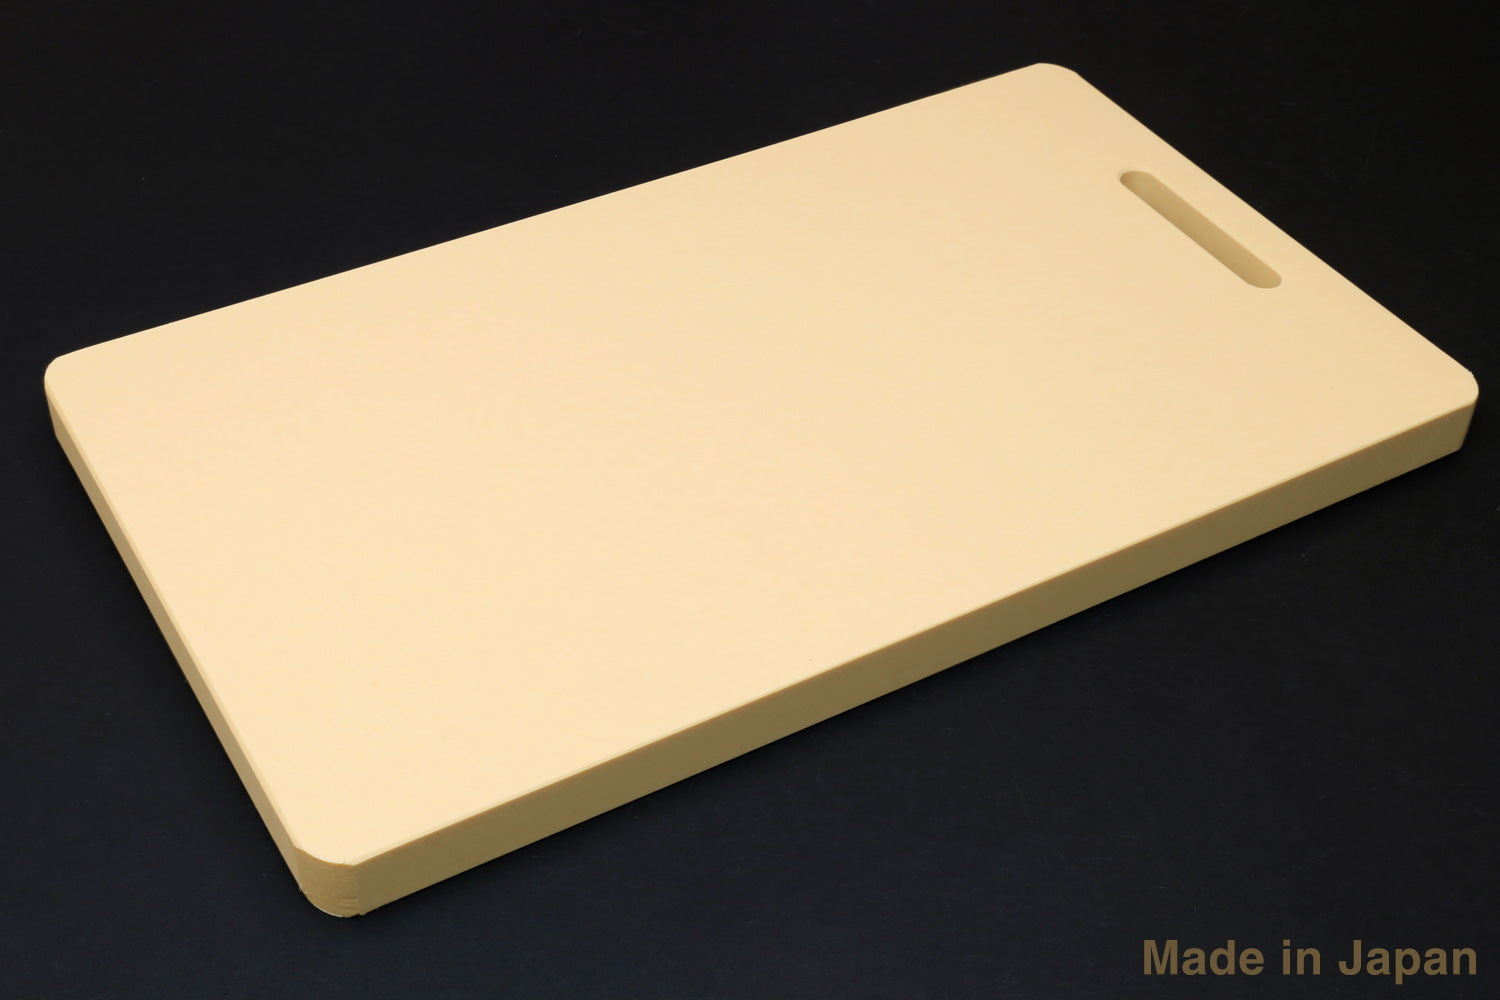 Williams Sonoma Antibacterial Synthetic Cutting & Carving Board